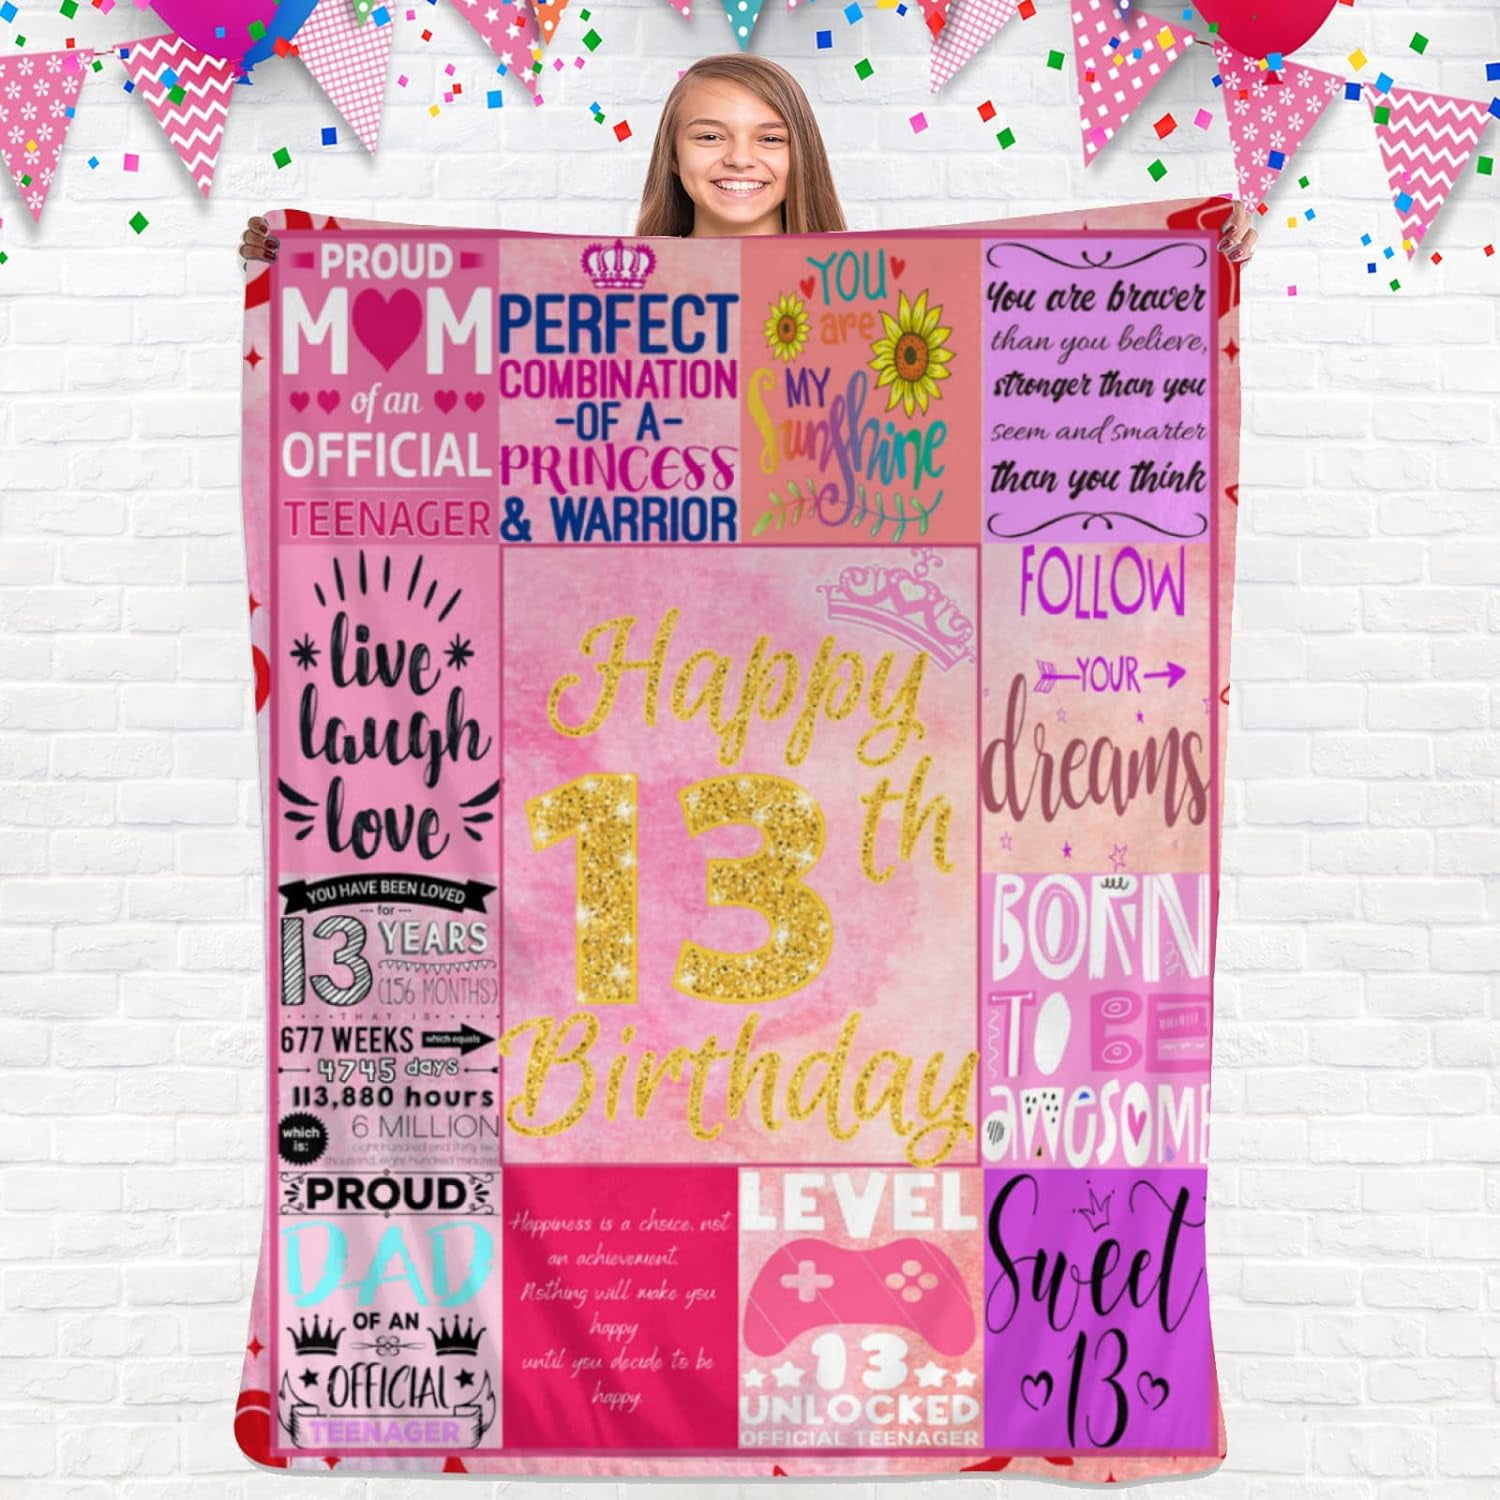 RooRuns 14 Year Old Girl Gift Ideas, Gifts for 14 Year Old Girl